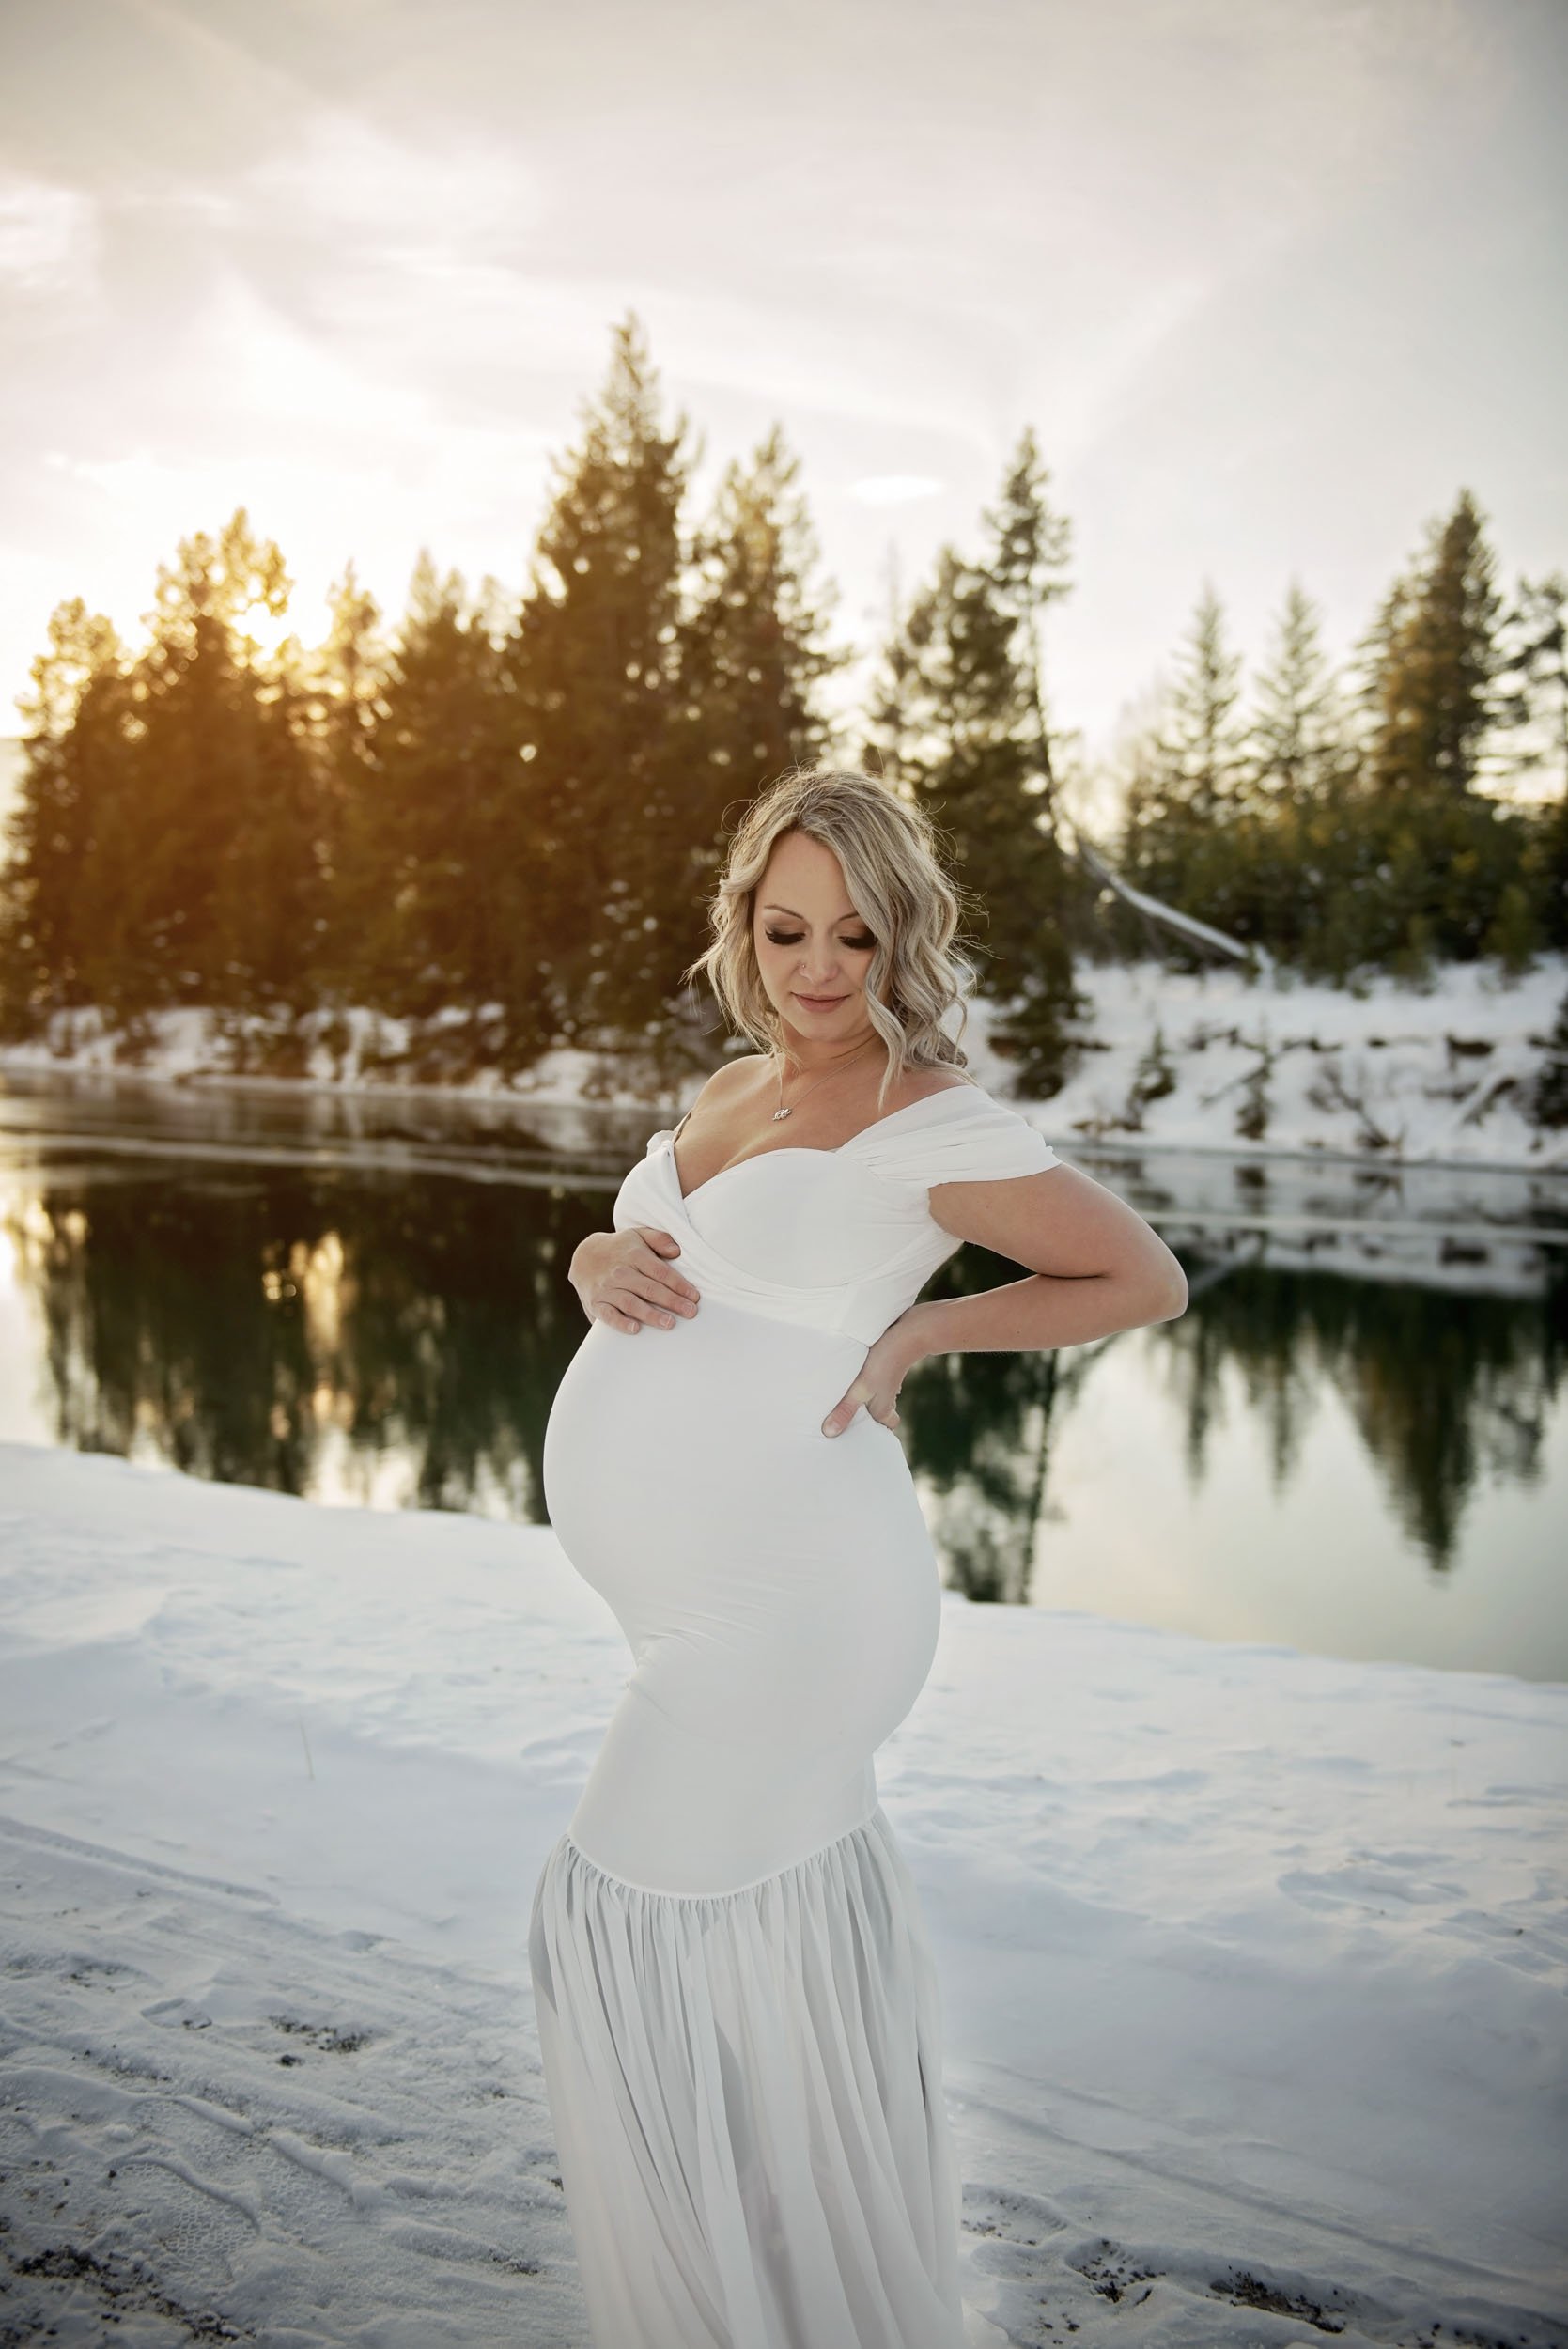 Lace and locket photo Airdrie Calgary Maternity Photographer-17.jpg